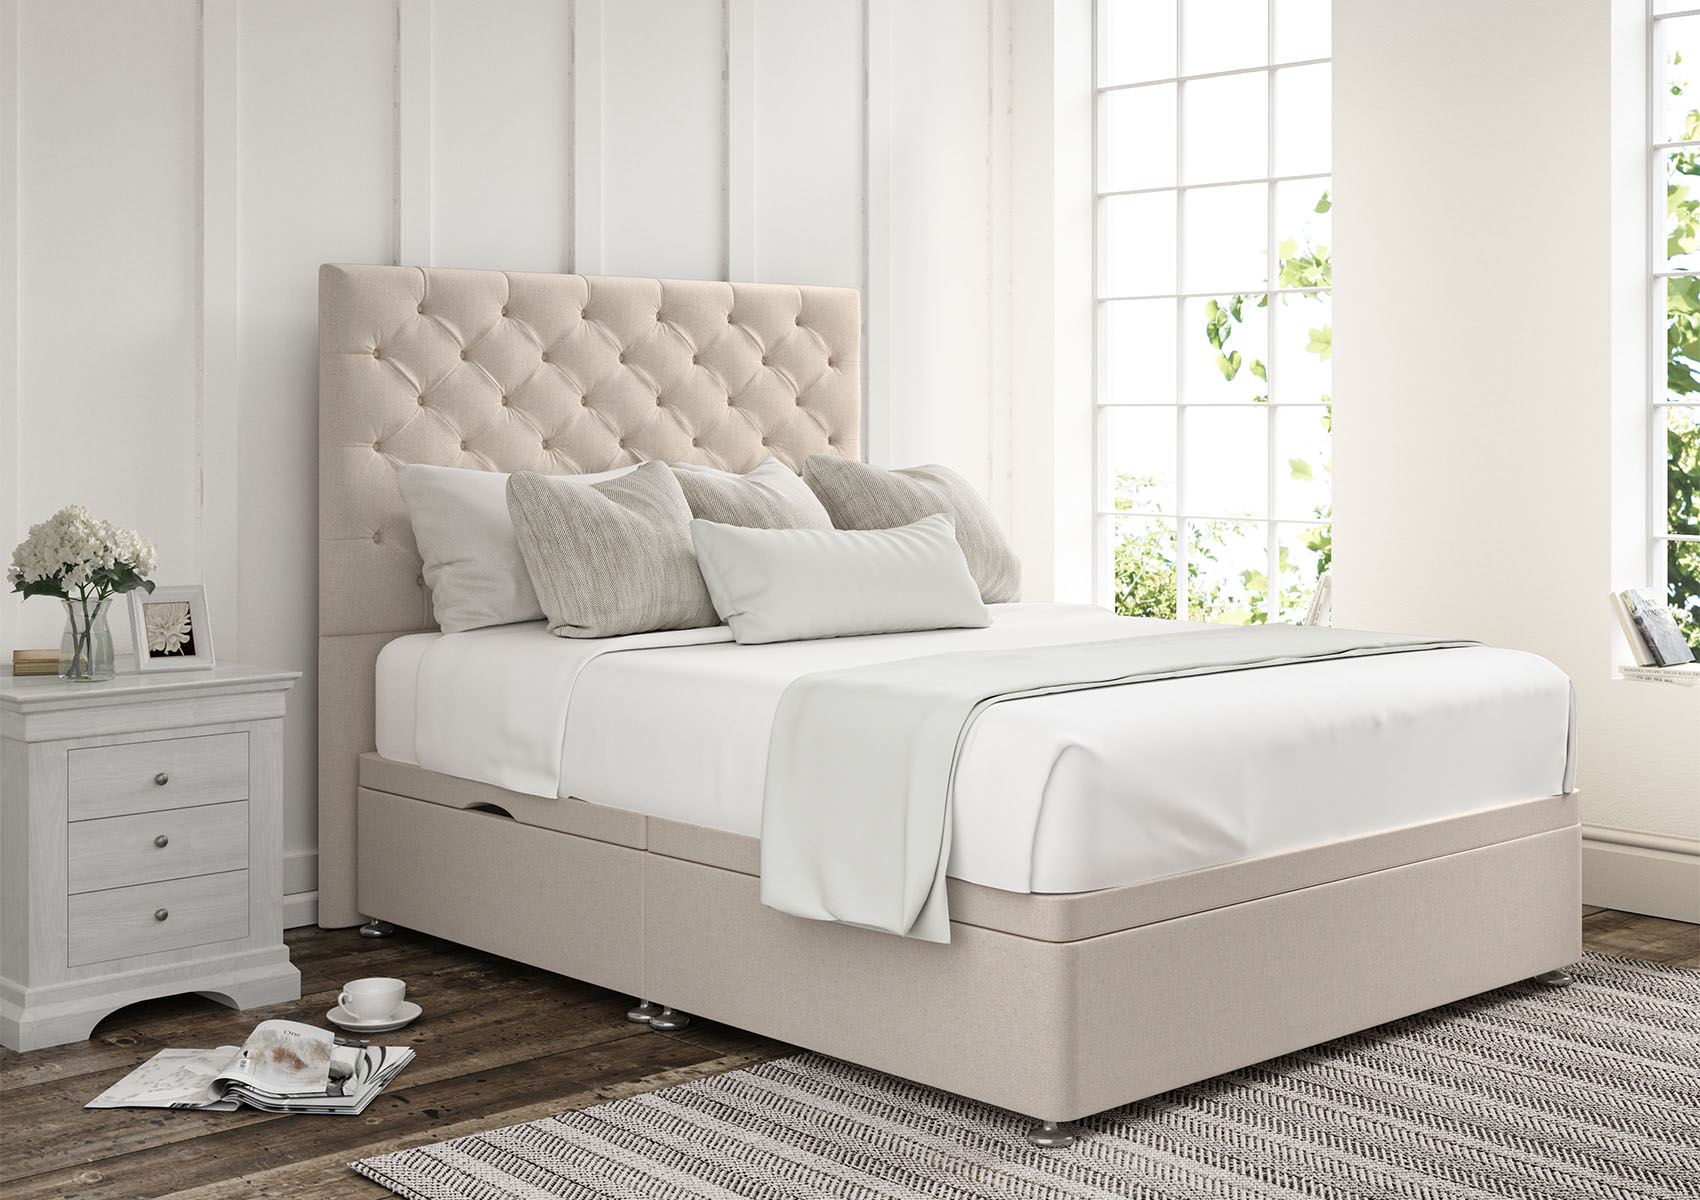 View Chesterfield Teddy Cream Upholstered Double Ottoman Bed Time4Sleep information